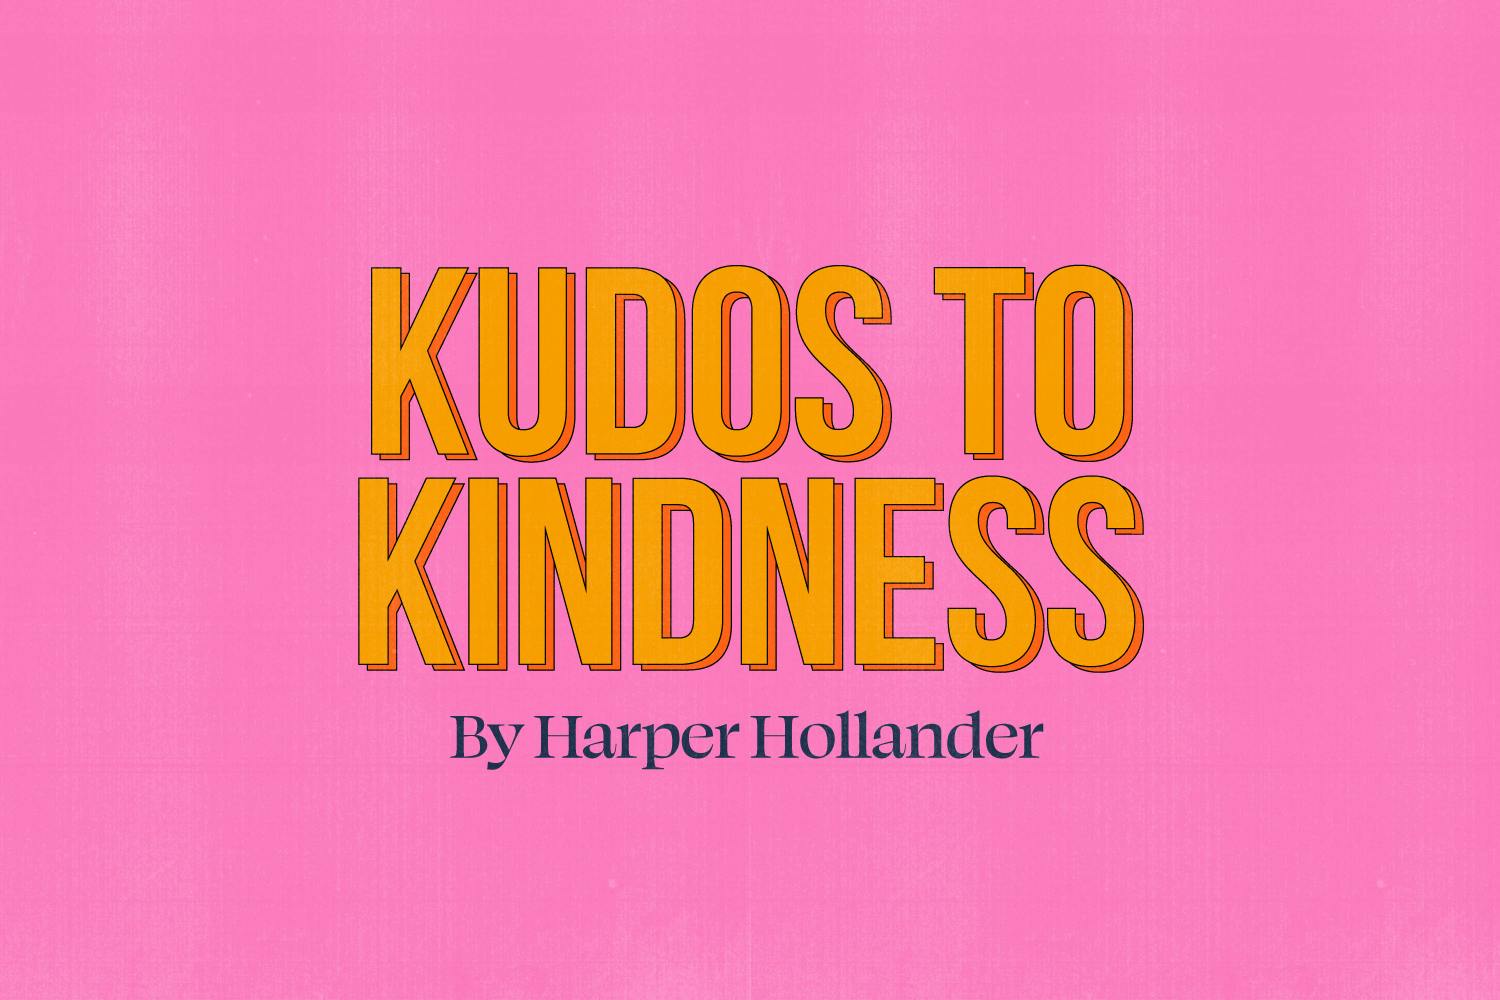 The Essay: Kudos to Kindess